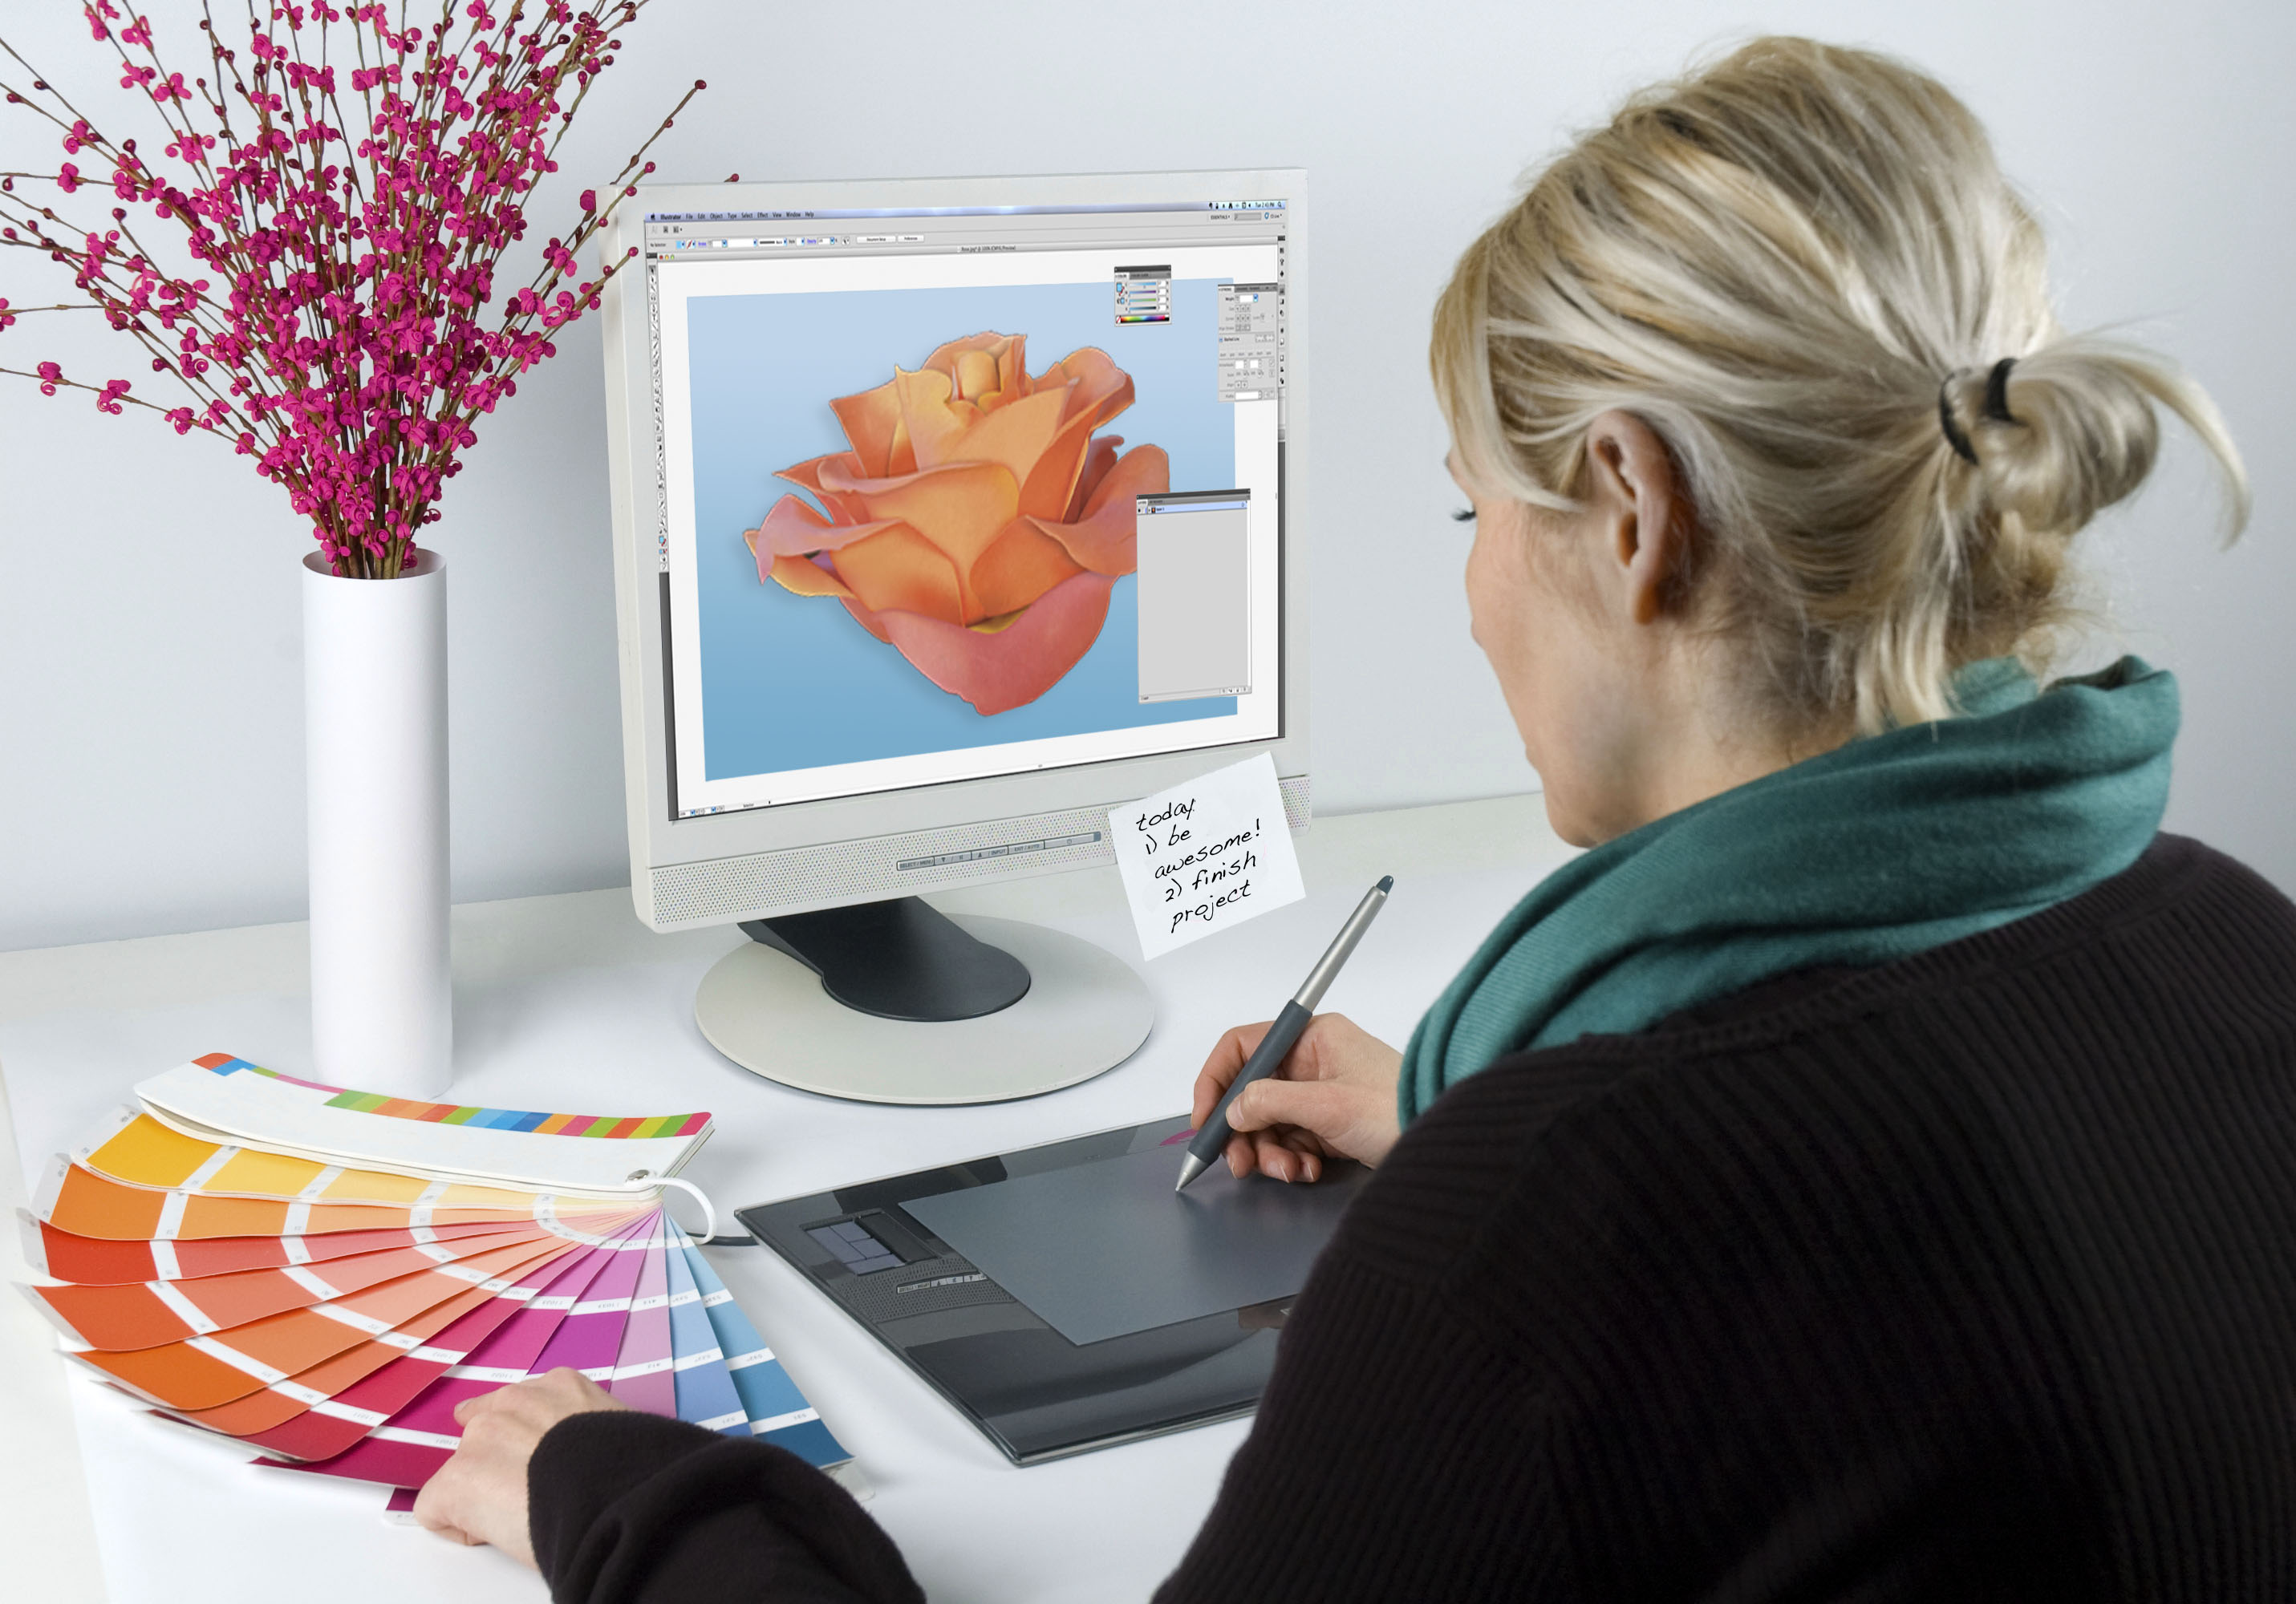 Earn an Associate’s Degree in Graphic Design